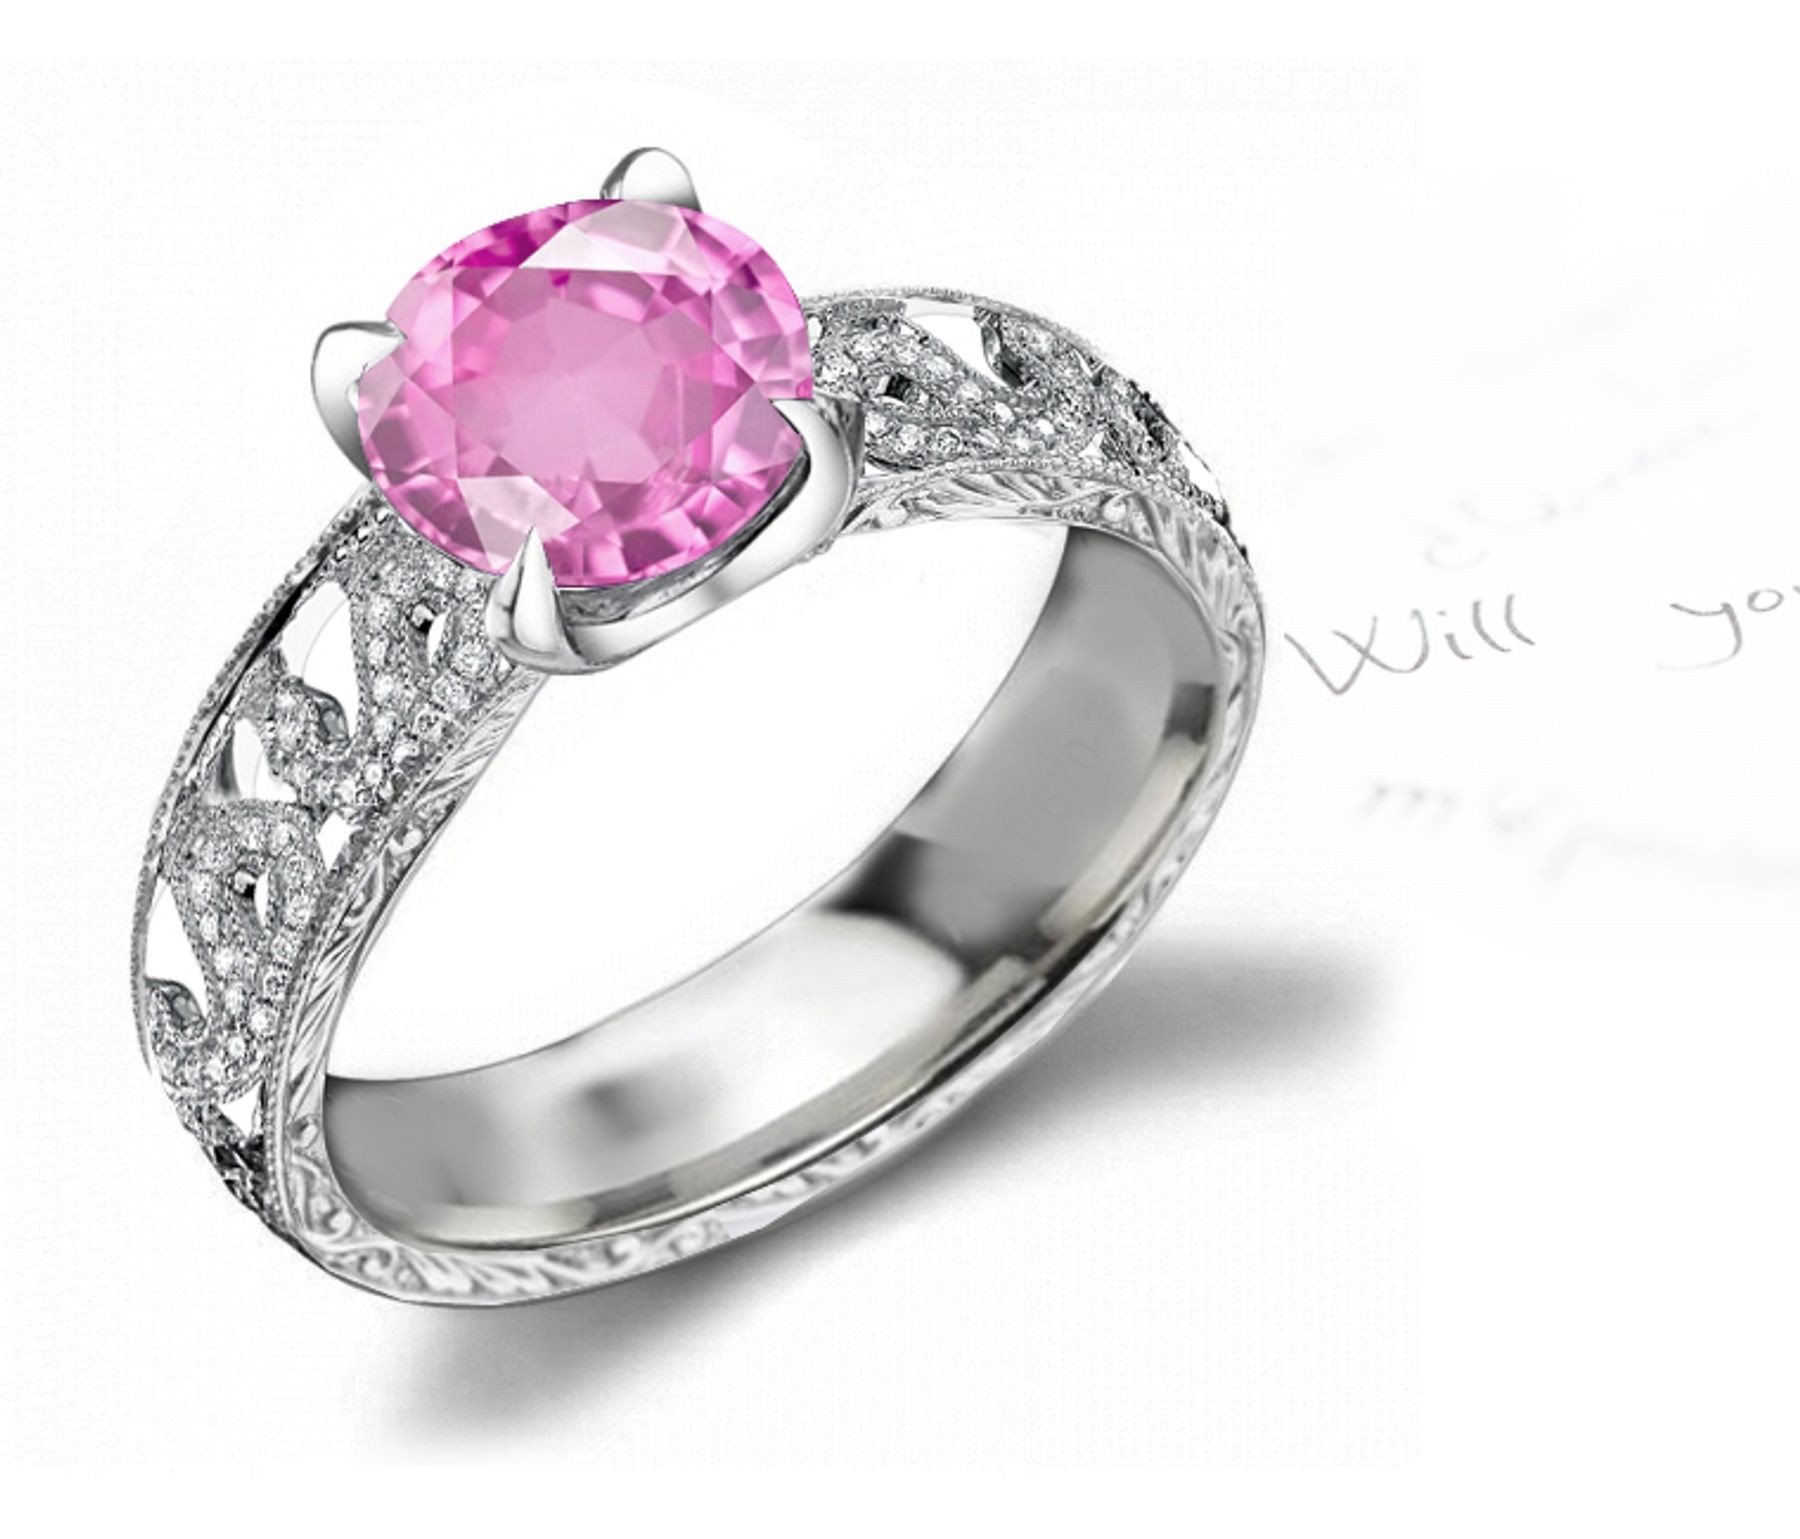 Gold Shank with Leaf Pattern Pink Regal Sapphire & White Diamond Ring